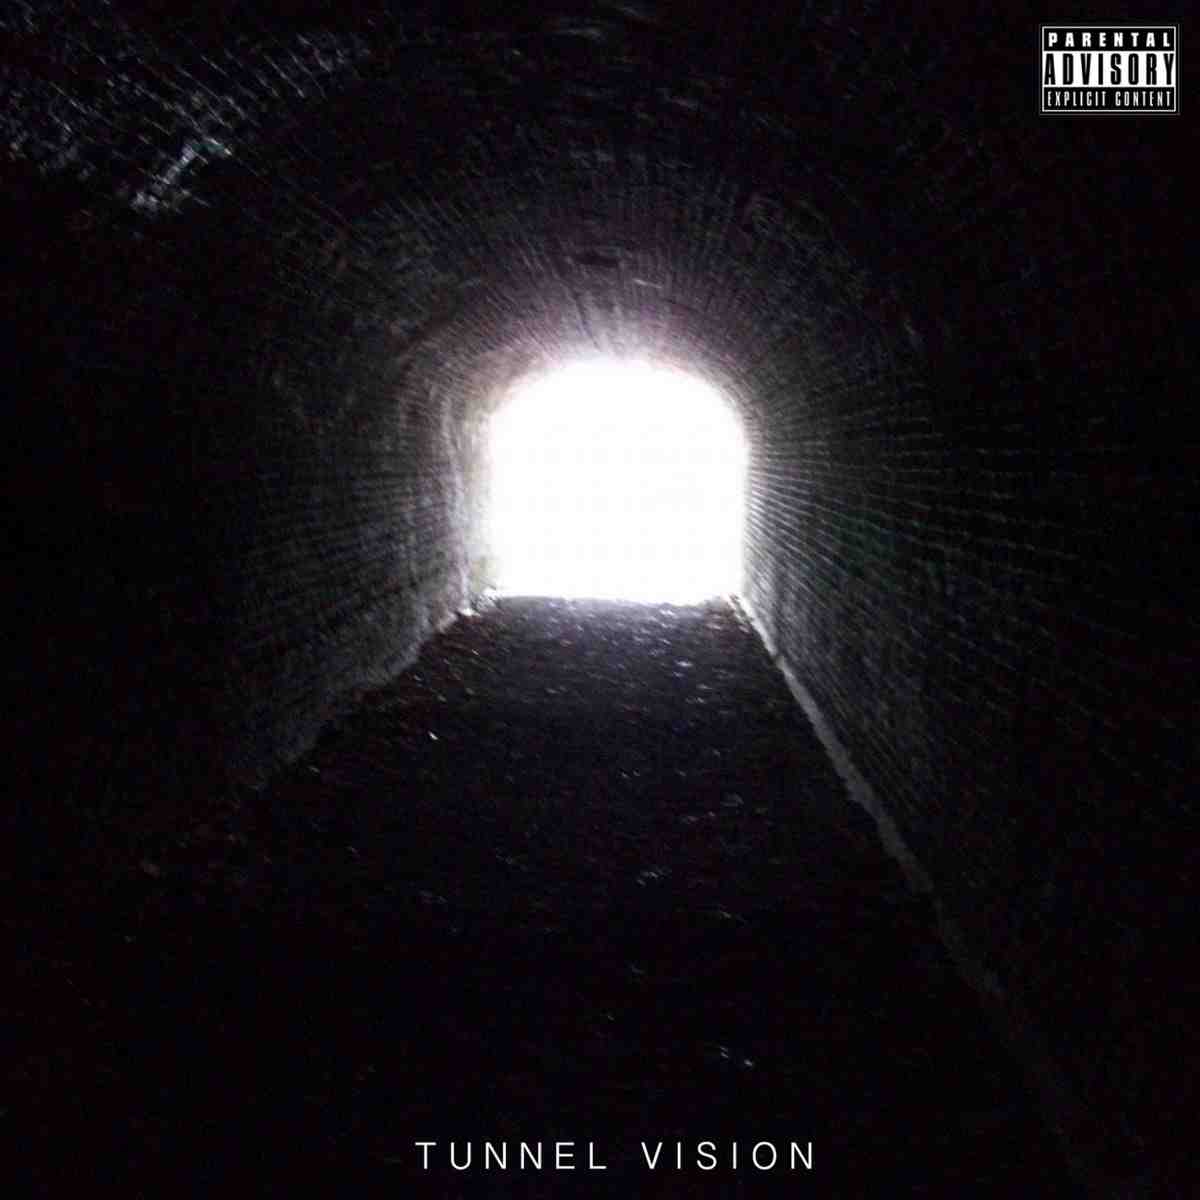 Vision tunnel